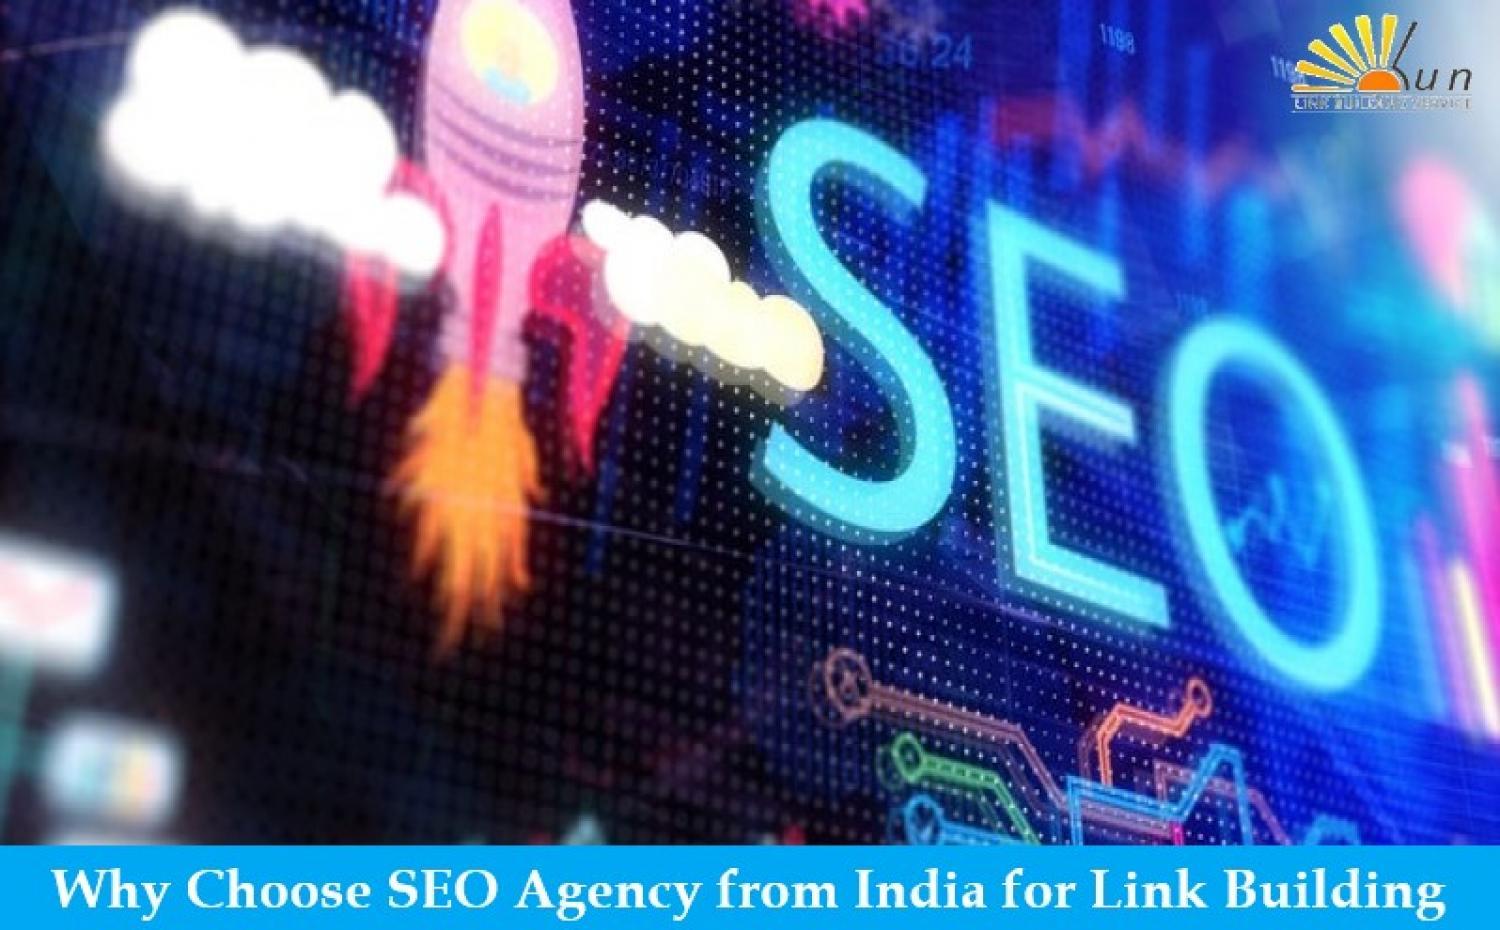 Why Choose SEO Agency from India for Link Building